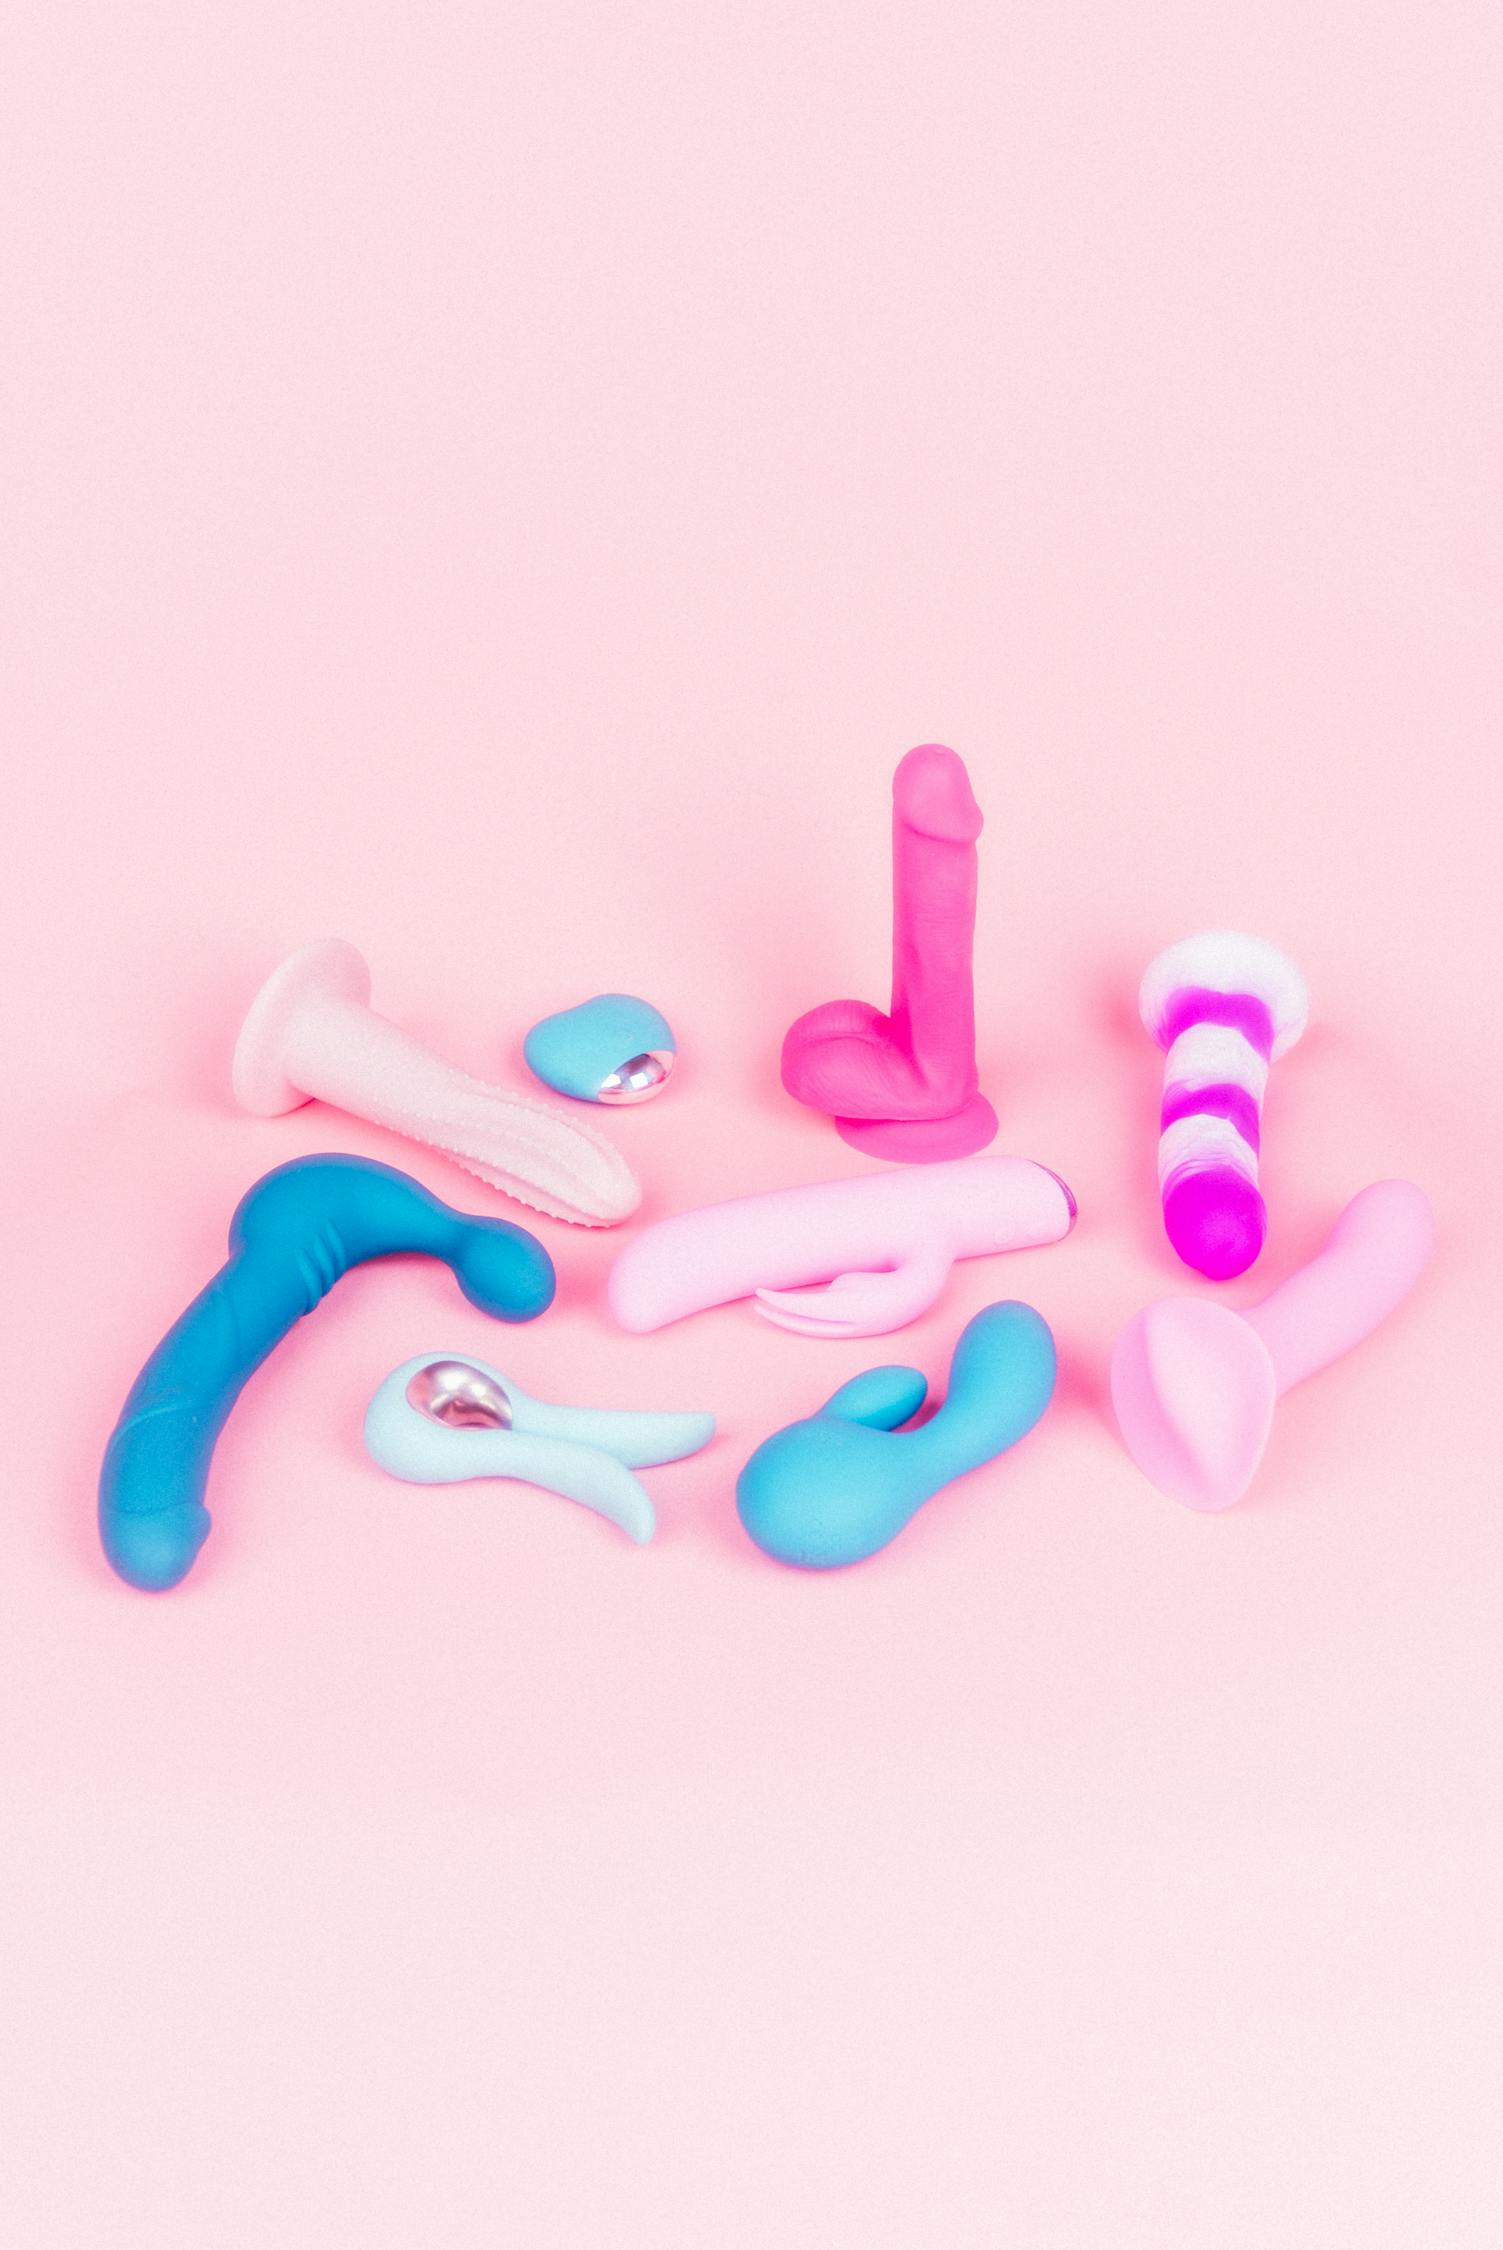 Sex Toys on Pink Background